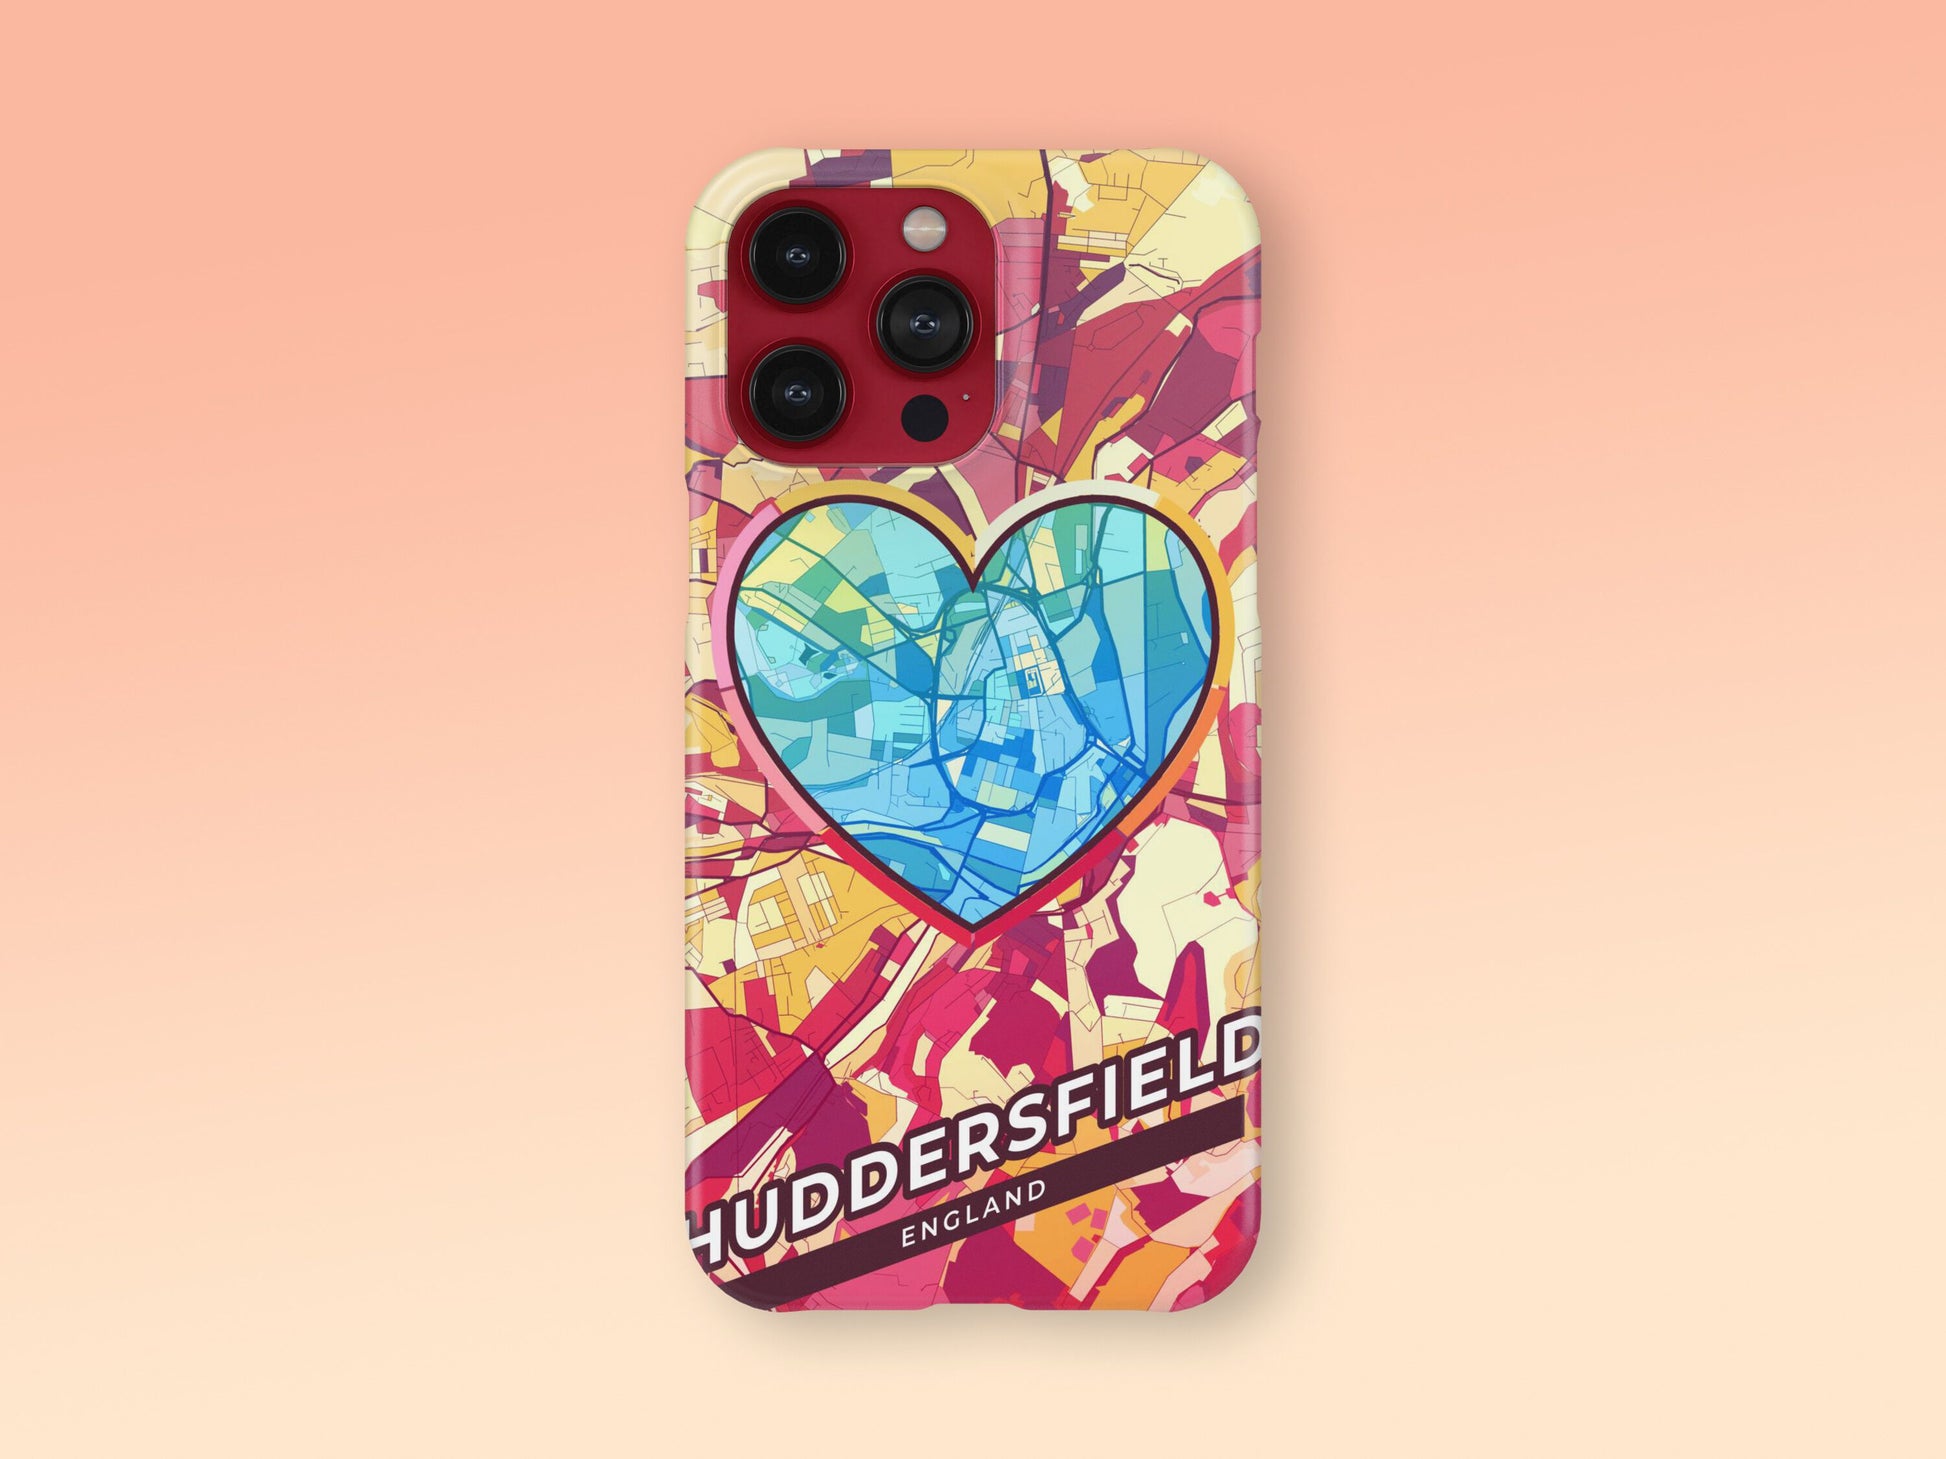 Huddersfield England slim phone case with colorful icon. Birthday, wedding or housewarming gift. Couple match cases. 2